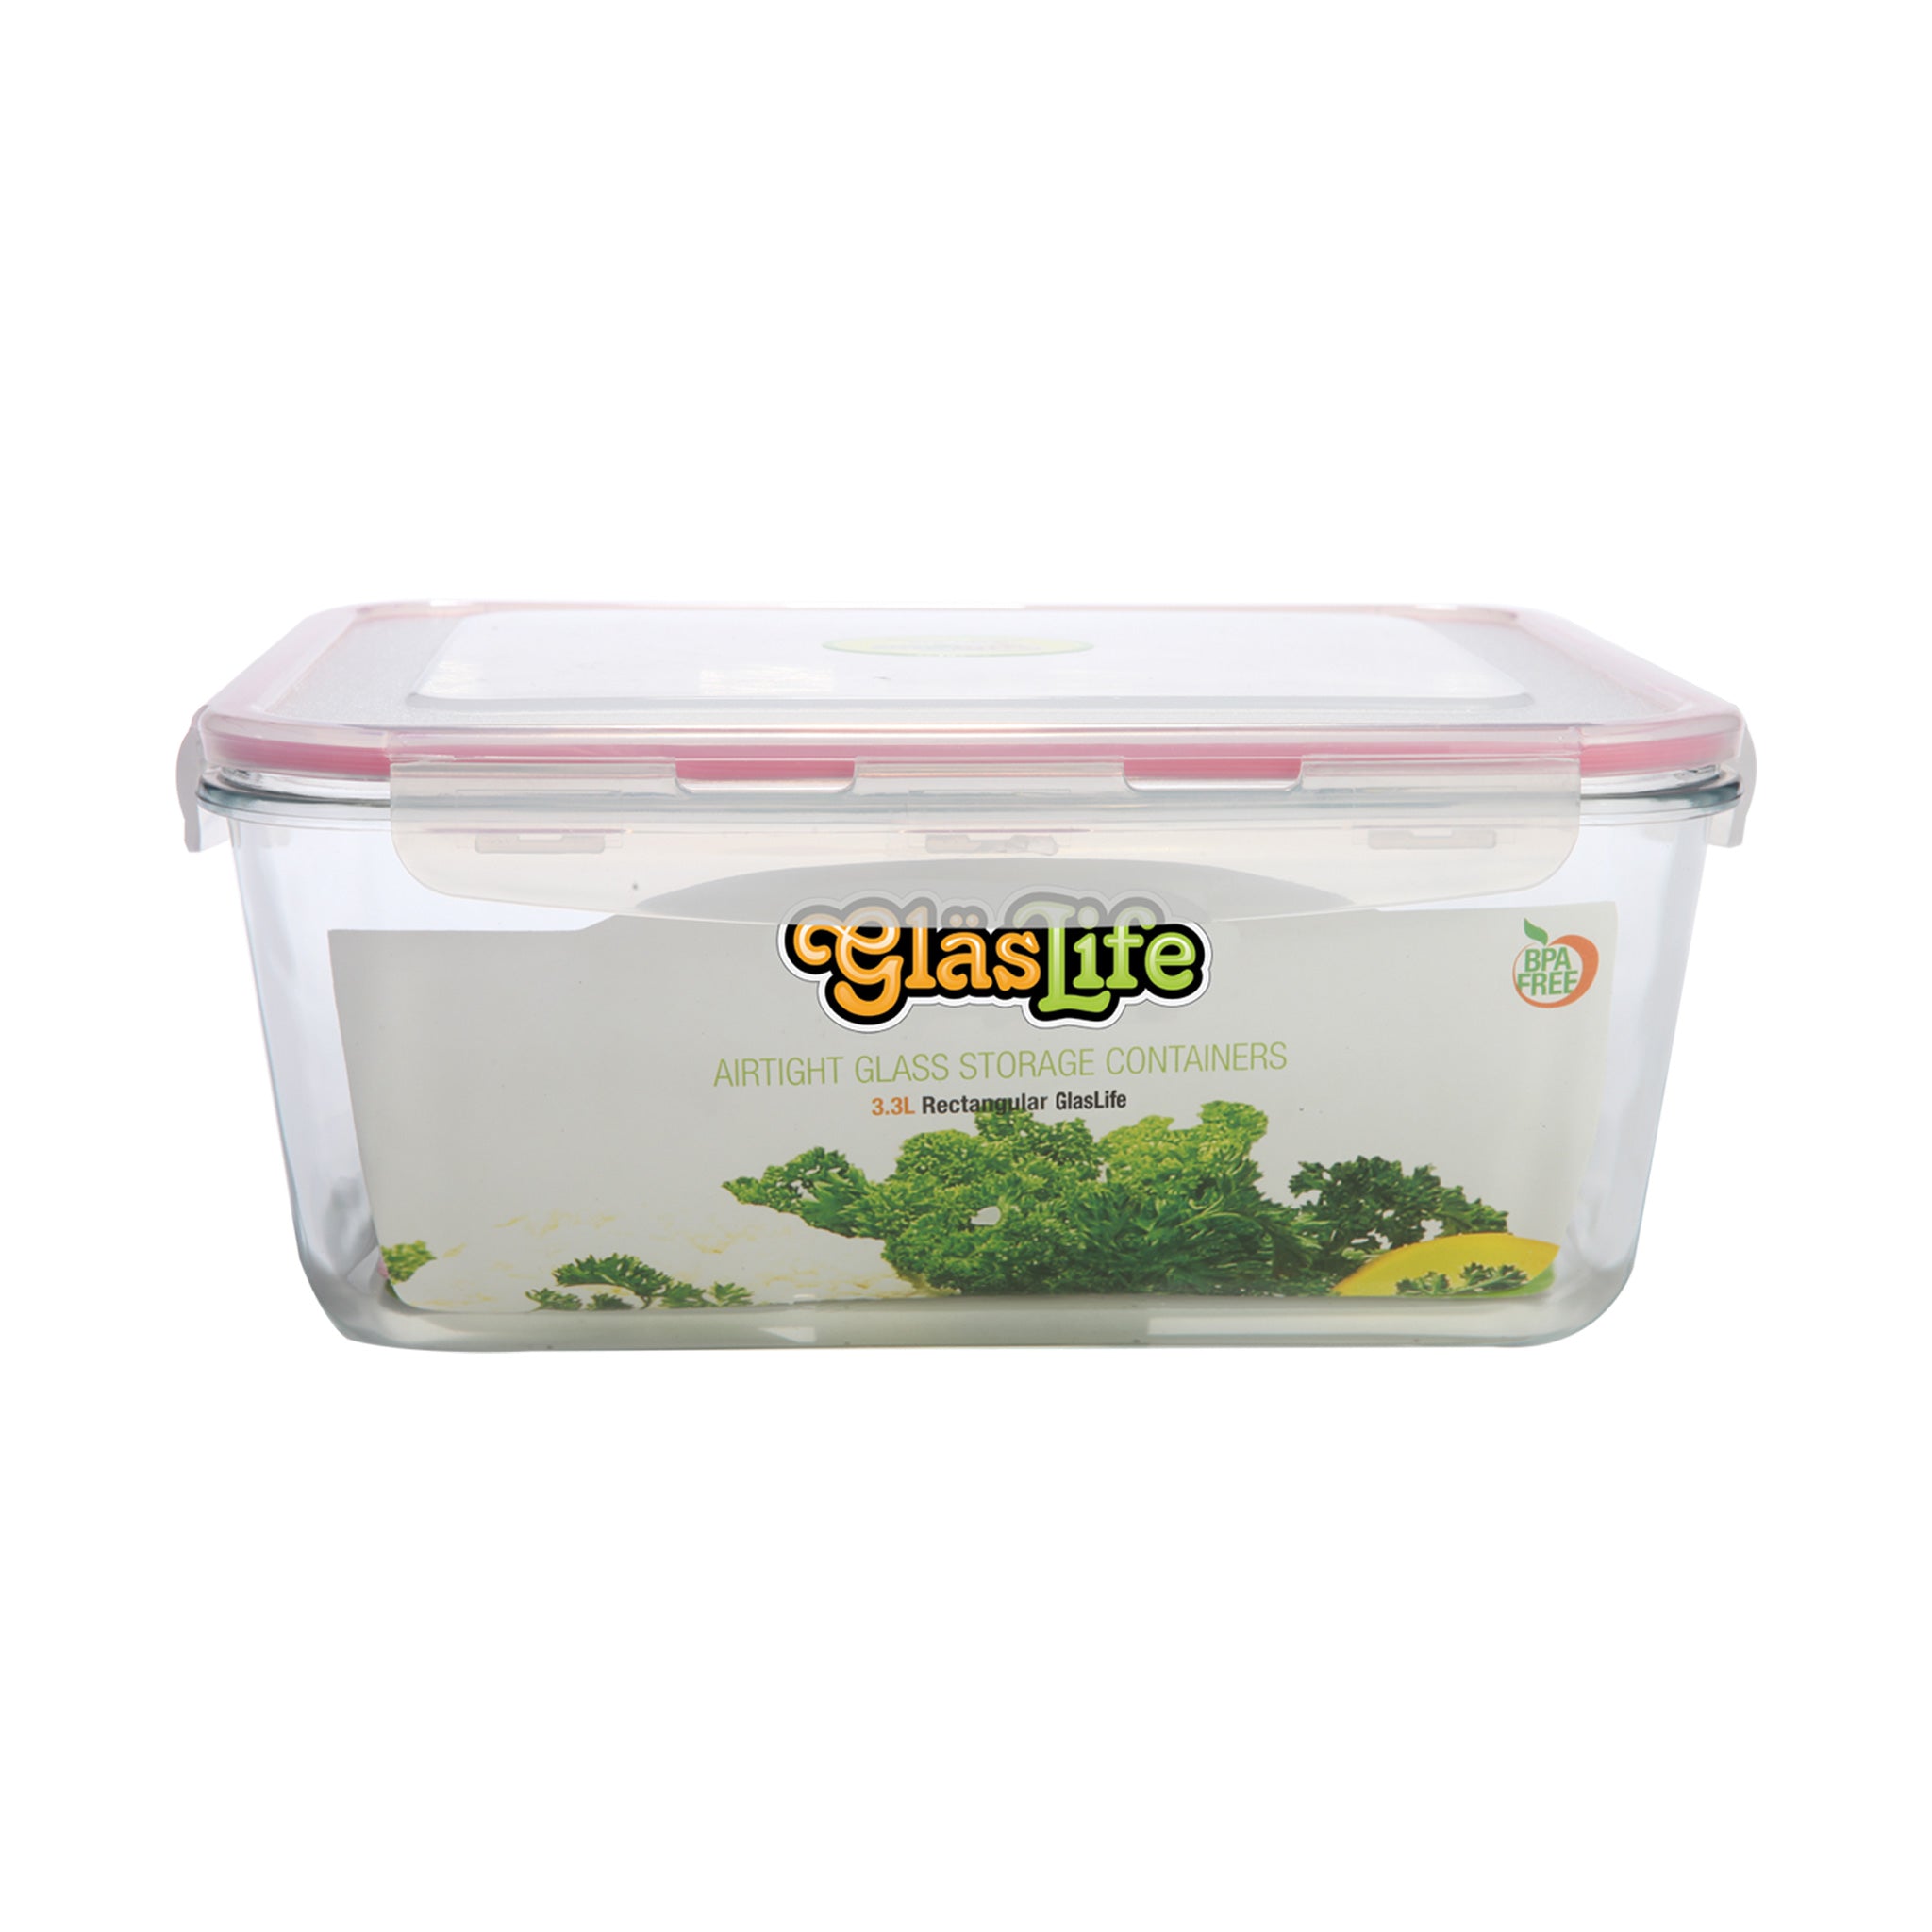 GlasLife® Air-Tight Glass Storage Container - Rectangular GLR19 Large 64 oz 1.9 L